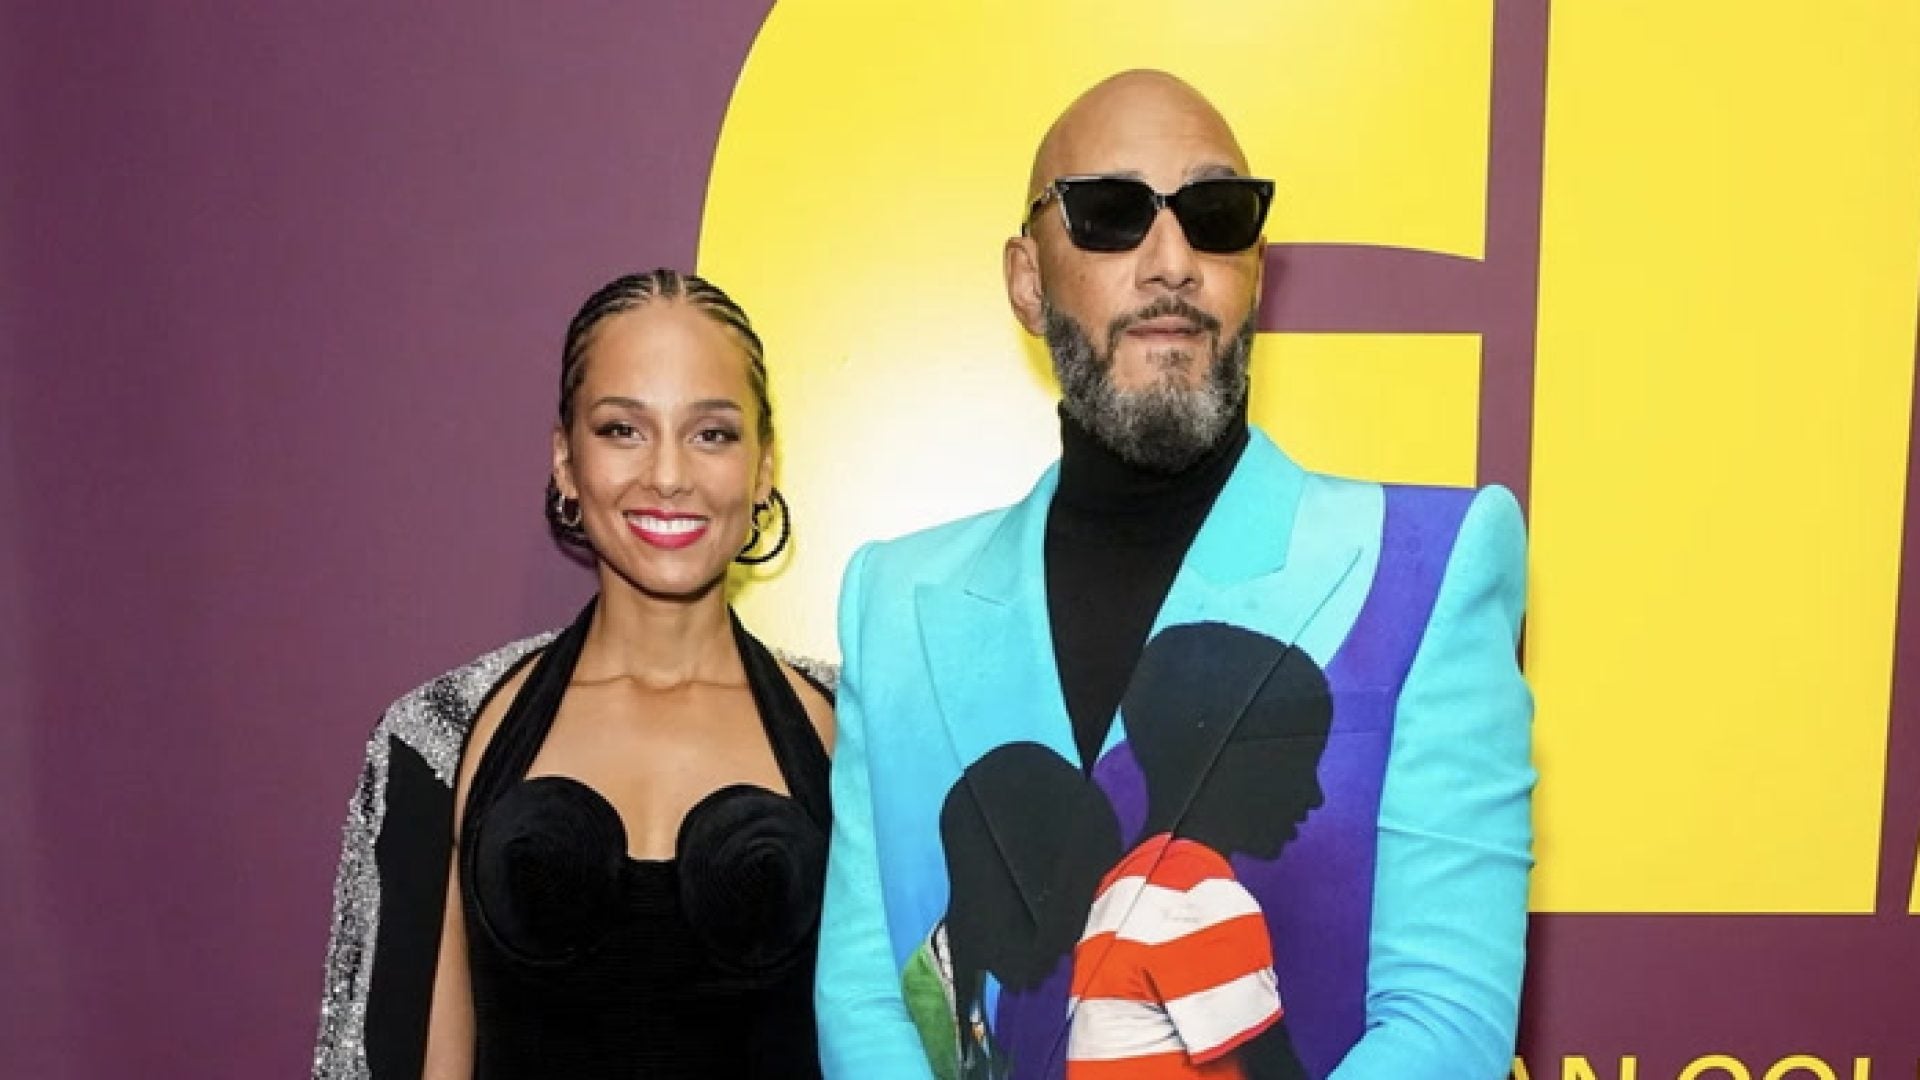 WATCH: In My Feed – Alicia Keys and Swizz Beatz’s Star-studded Exhibition Opening